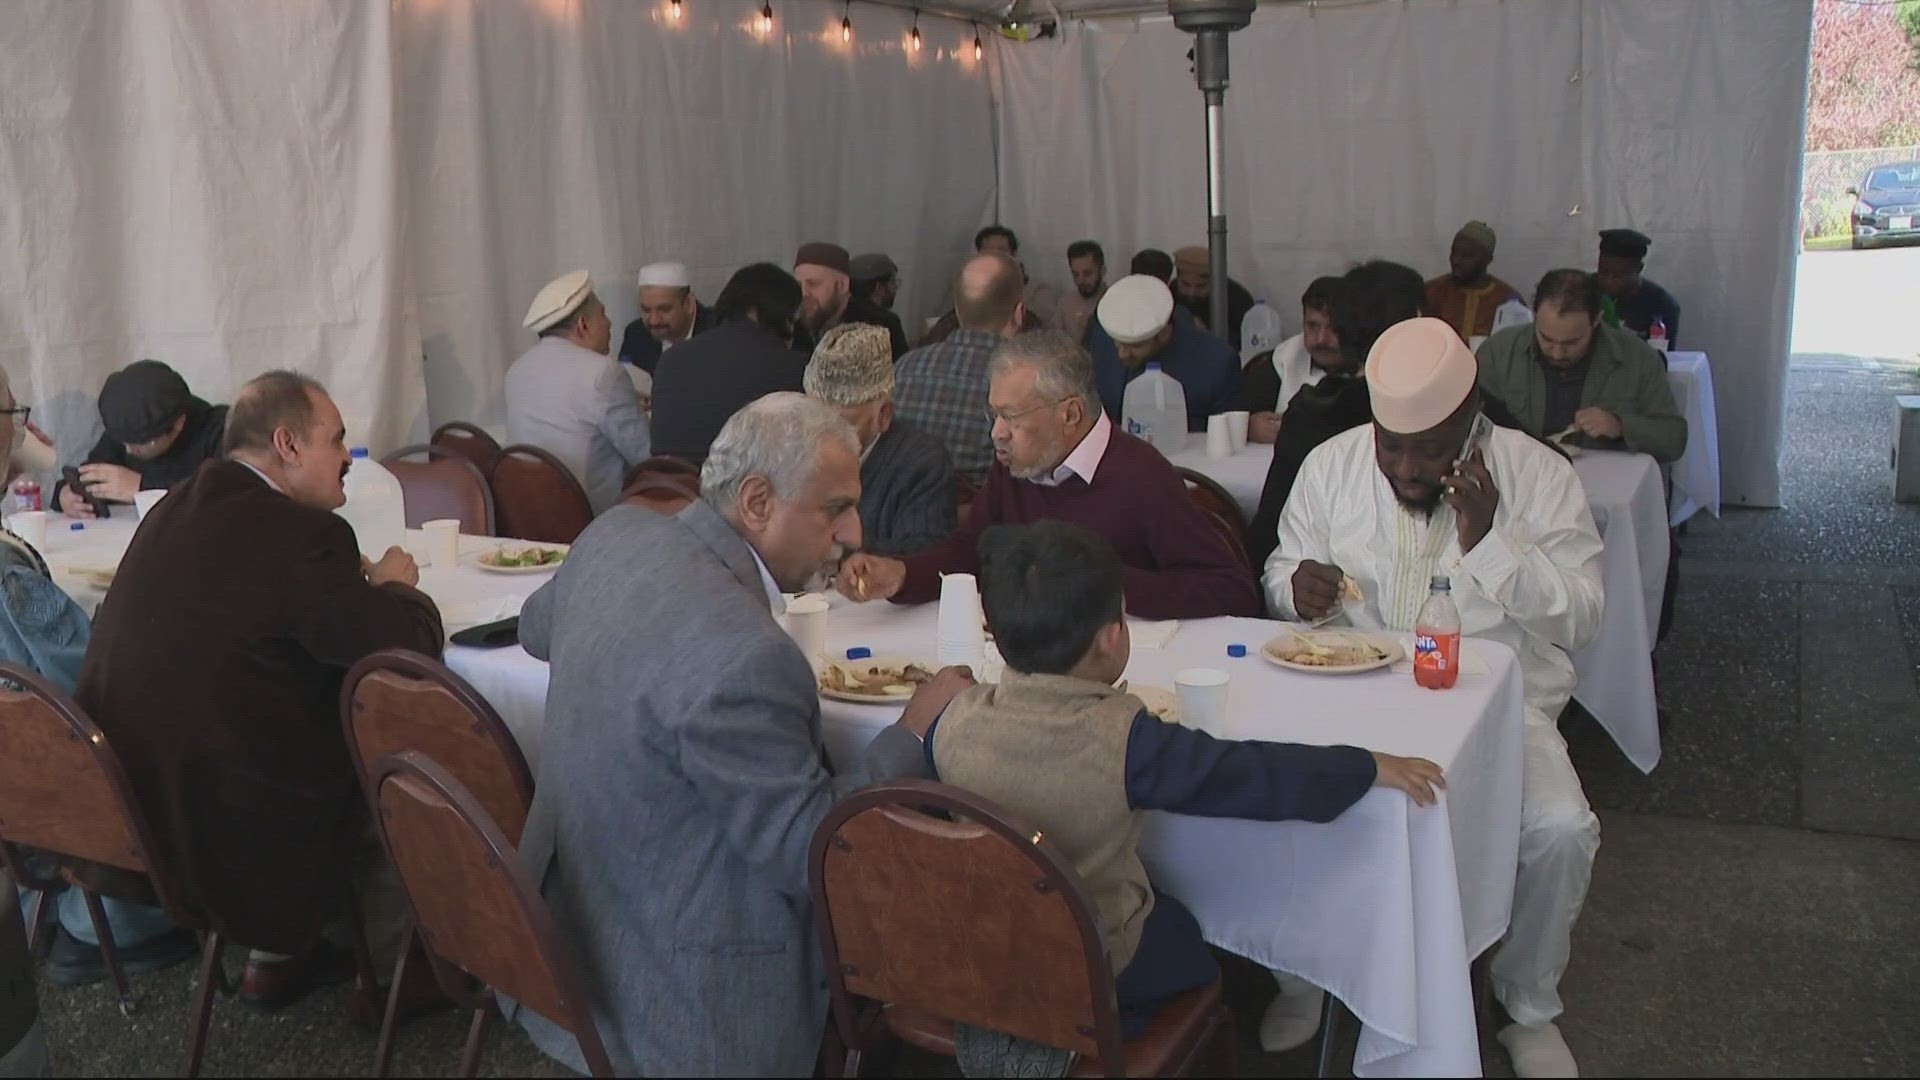 Ahmadiyya Muslim Community USA held an Eid-ul-Fitr celebration, saying they stand with Palestinians during the ongoing conflict.